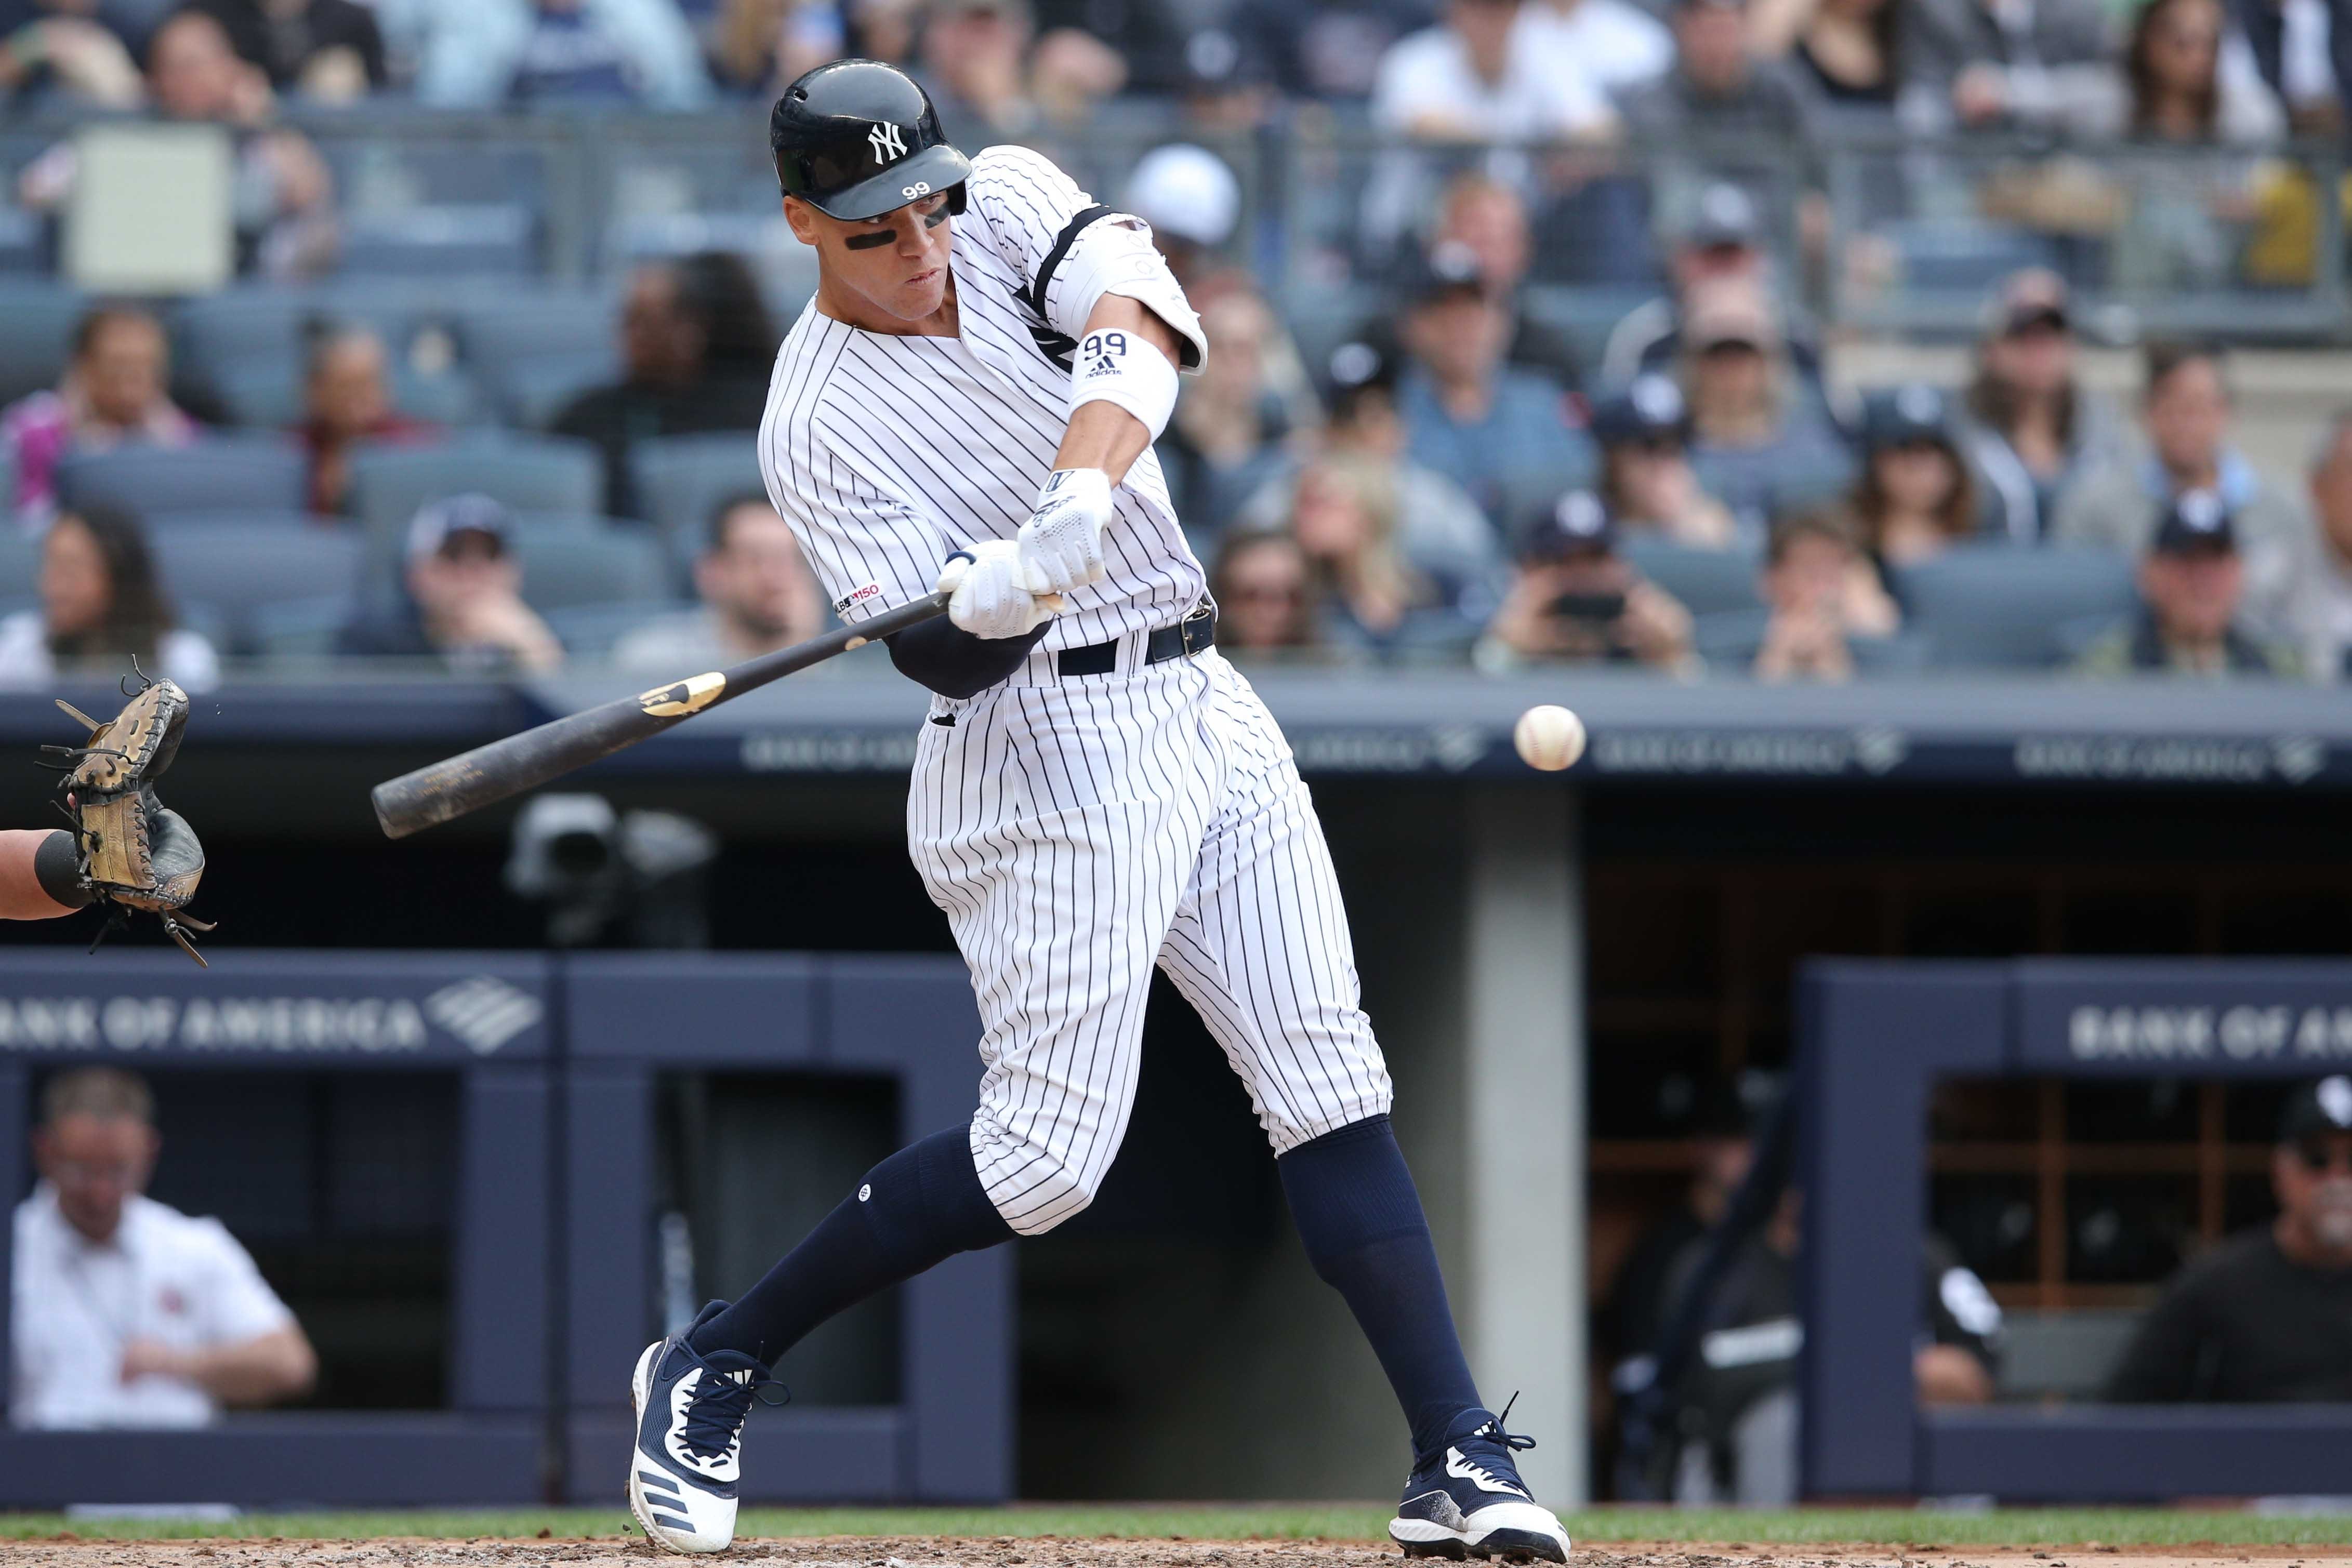 Taking a look at the Yankees projected lineup for the 2020 season